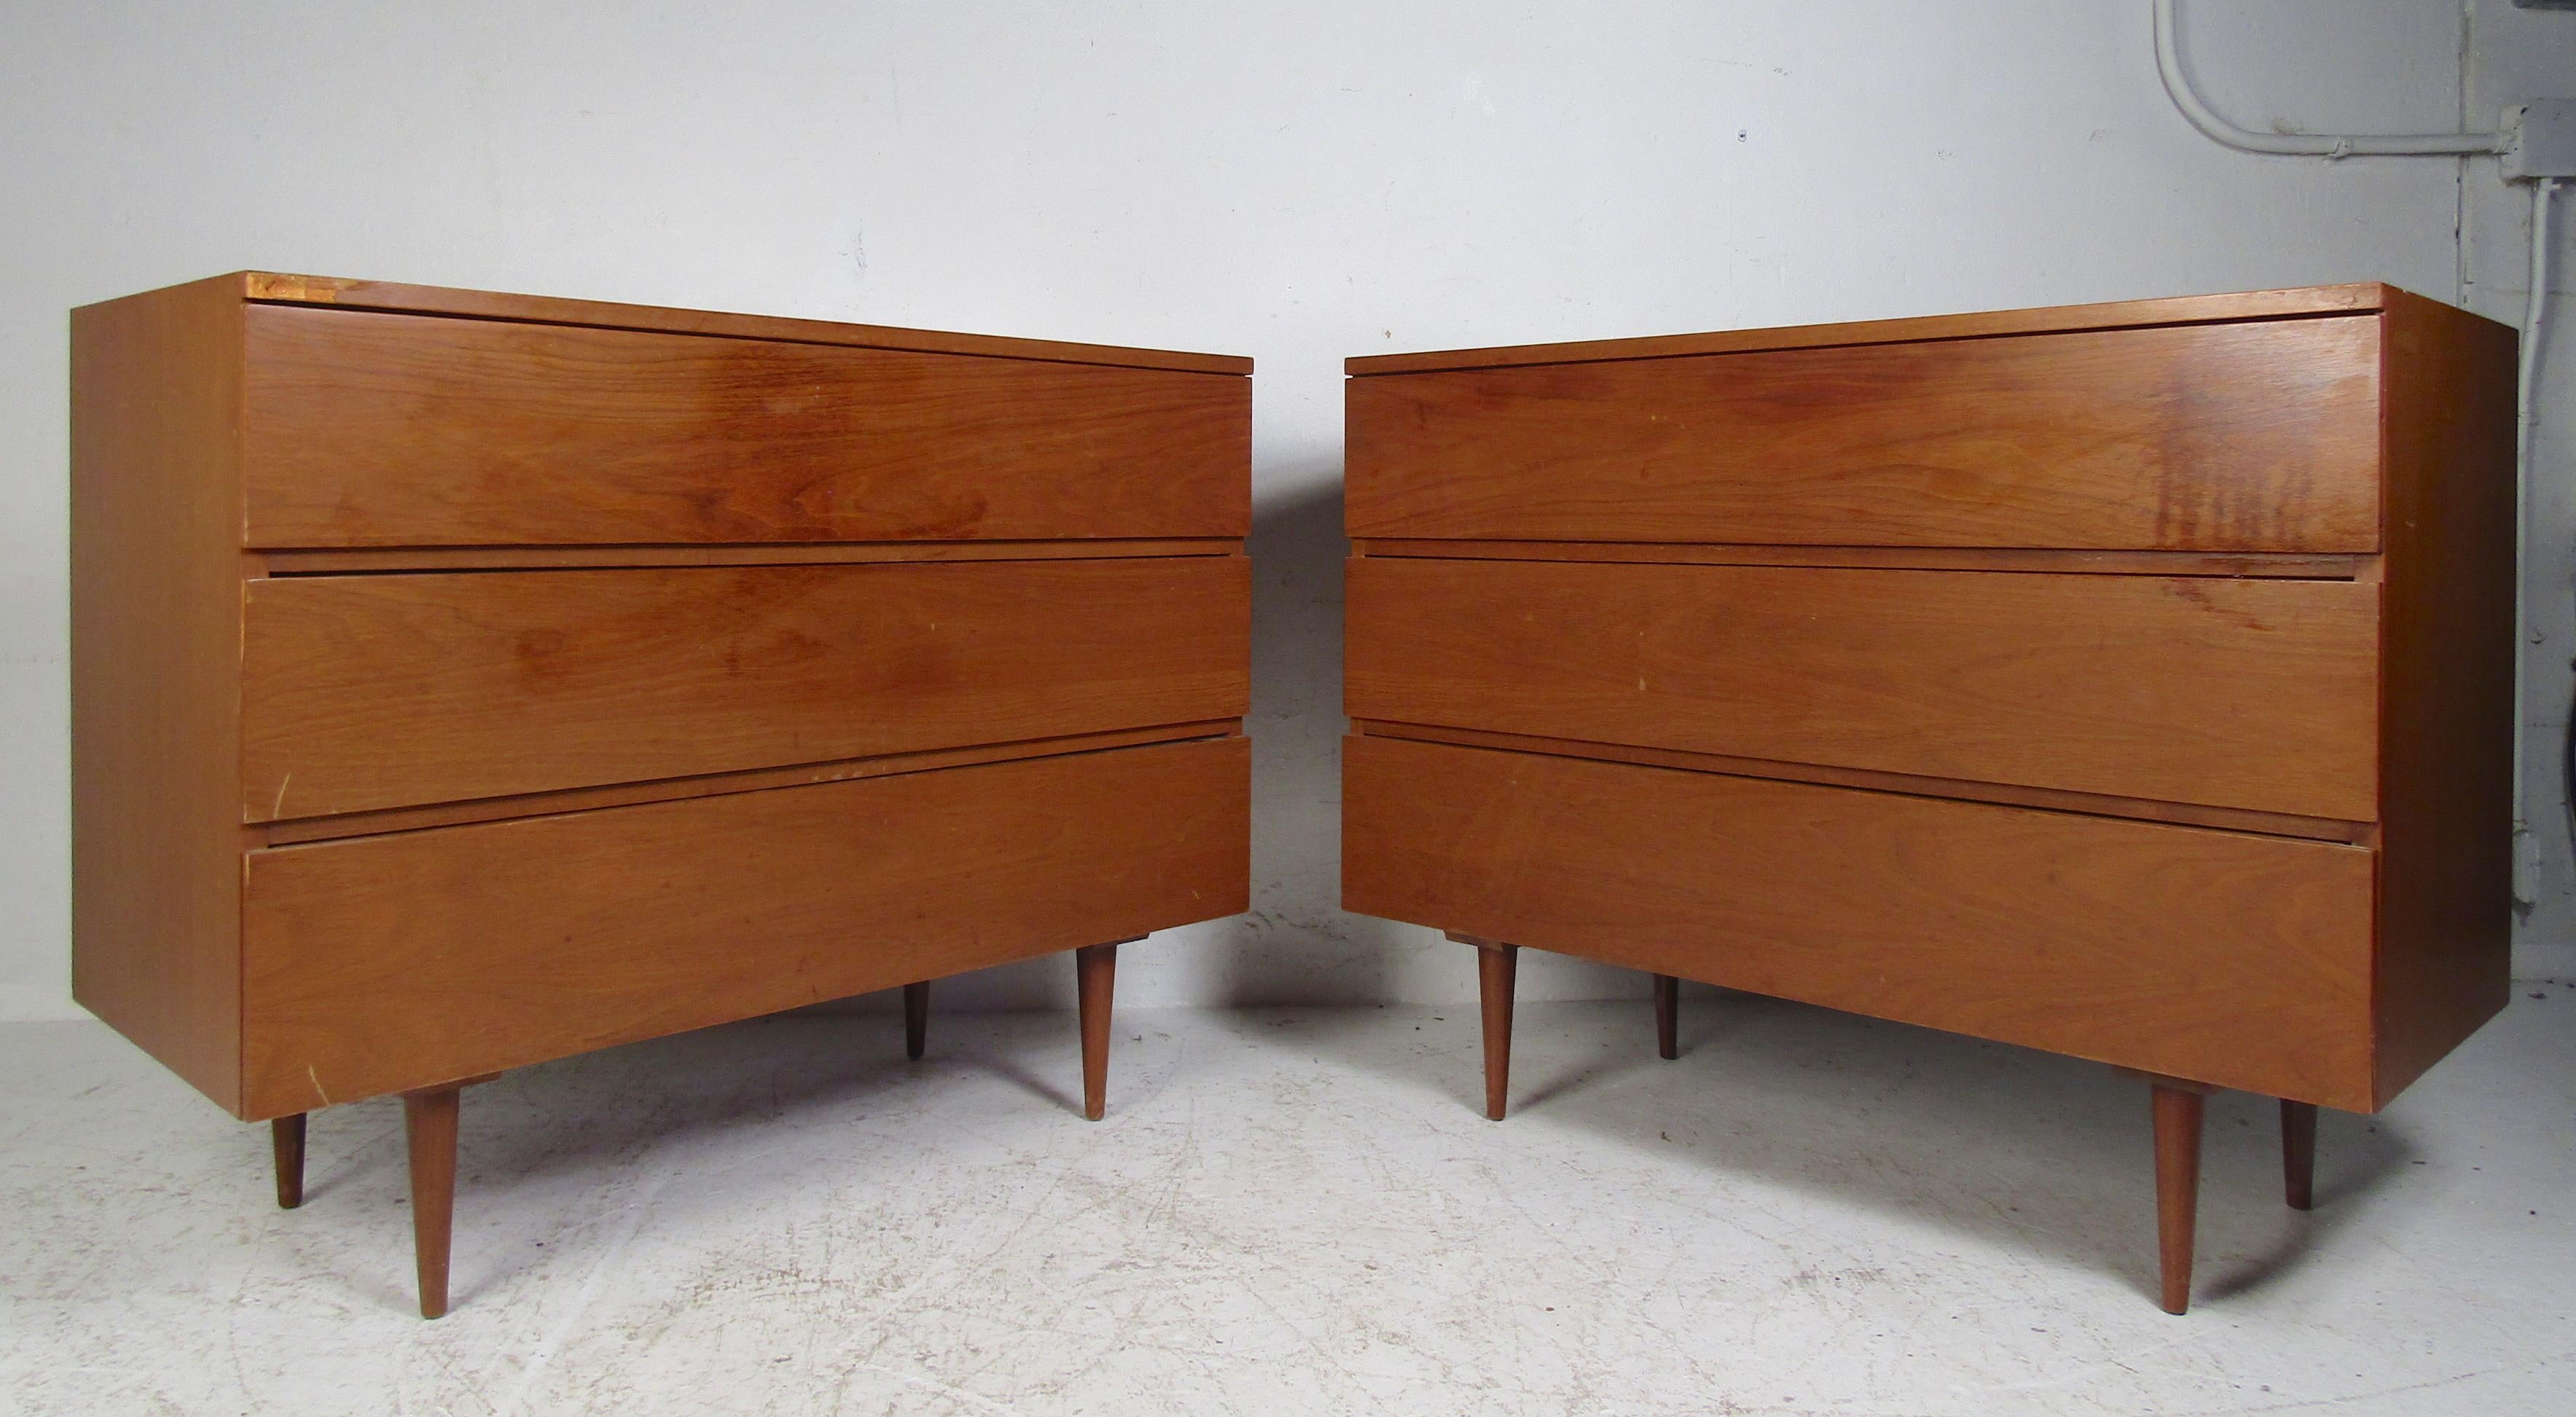 This beautiful pair of vintage modern chests have three drawers ensuring plenty of space of storage. Straight line design with hidden drawer pulls, a vintage walnut finish, and tapered legs. This lovely pair makes the perfect addition to any modern